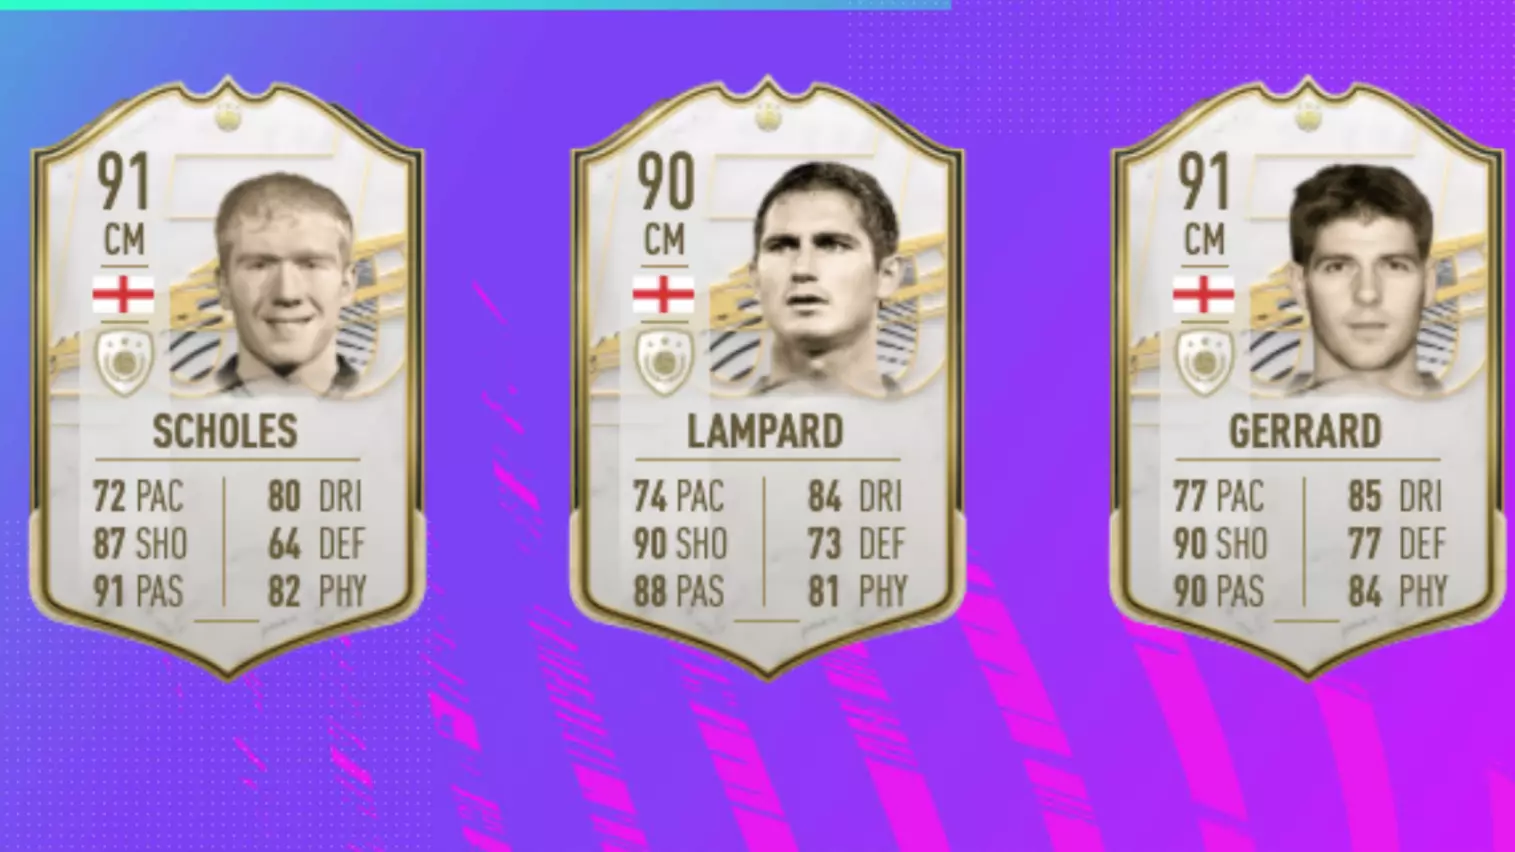 Steven Gerrard, Frank Lampard And Paul Scholes Ranked By 29 Attributes On FIFA 21